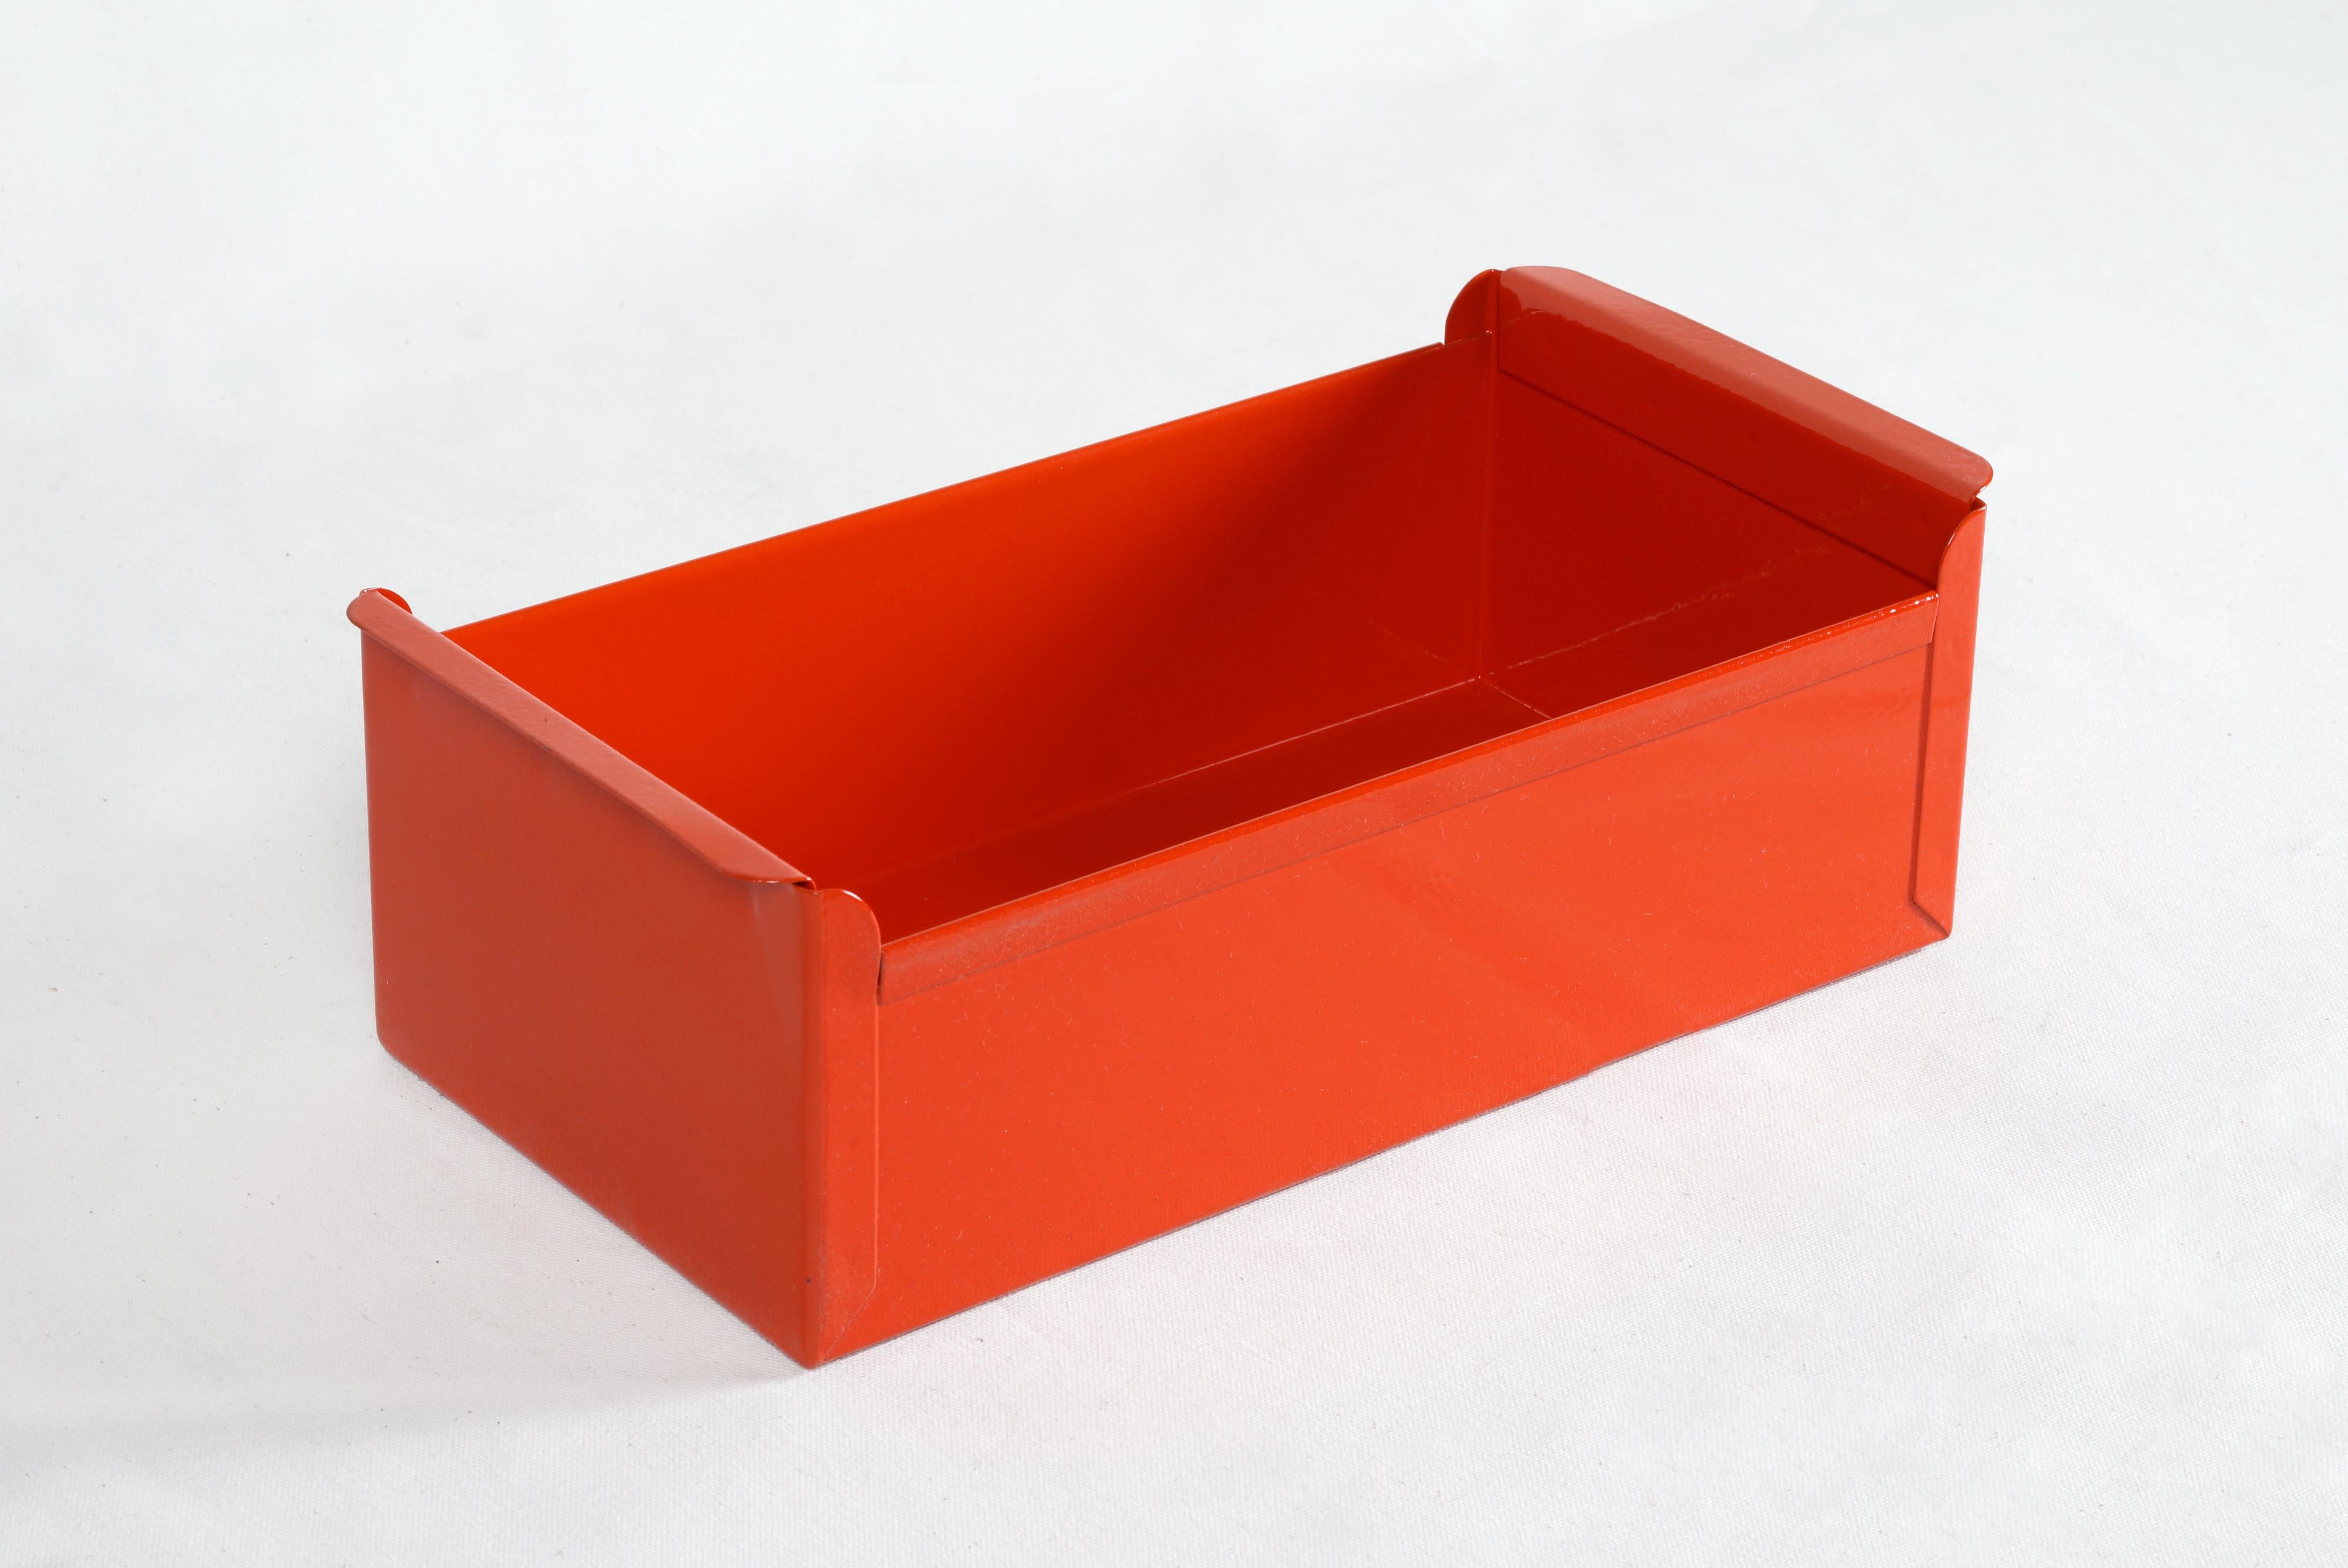 We refinished two matching 1950s steel filing drawers with a gloss fire engine red powder coat. These Classic, heavy-duty organizational bins are perfect for storing anything from office supplies to recipe cards. 

Two available. Sold separately.